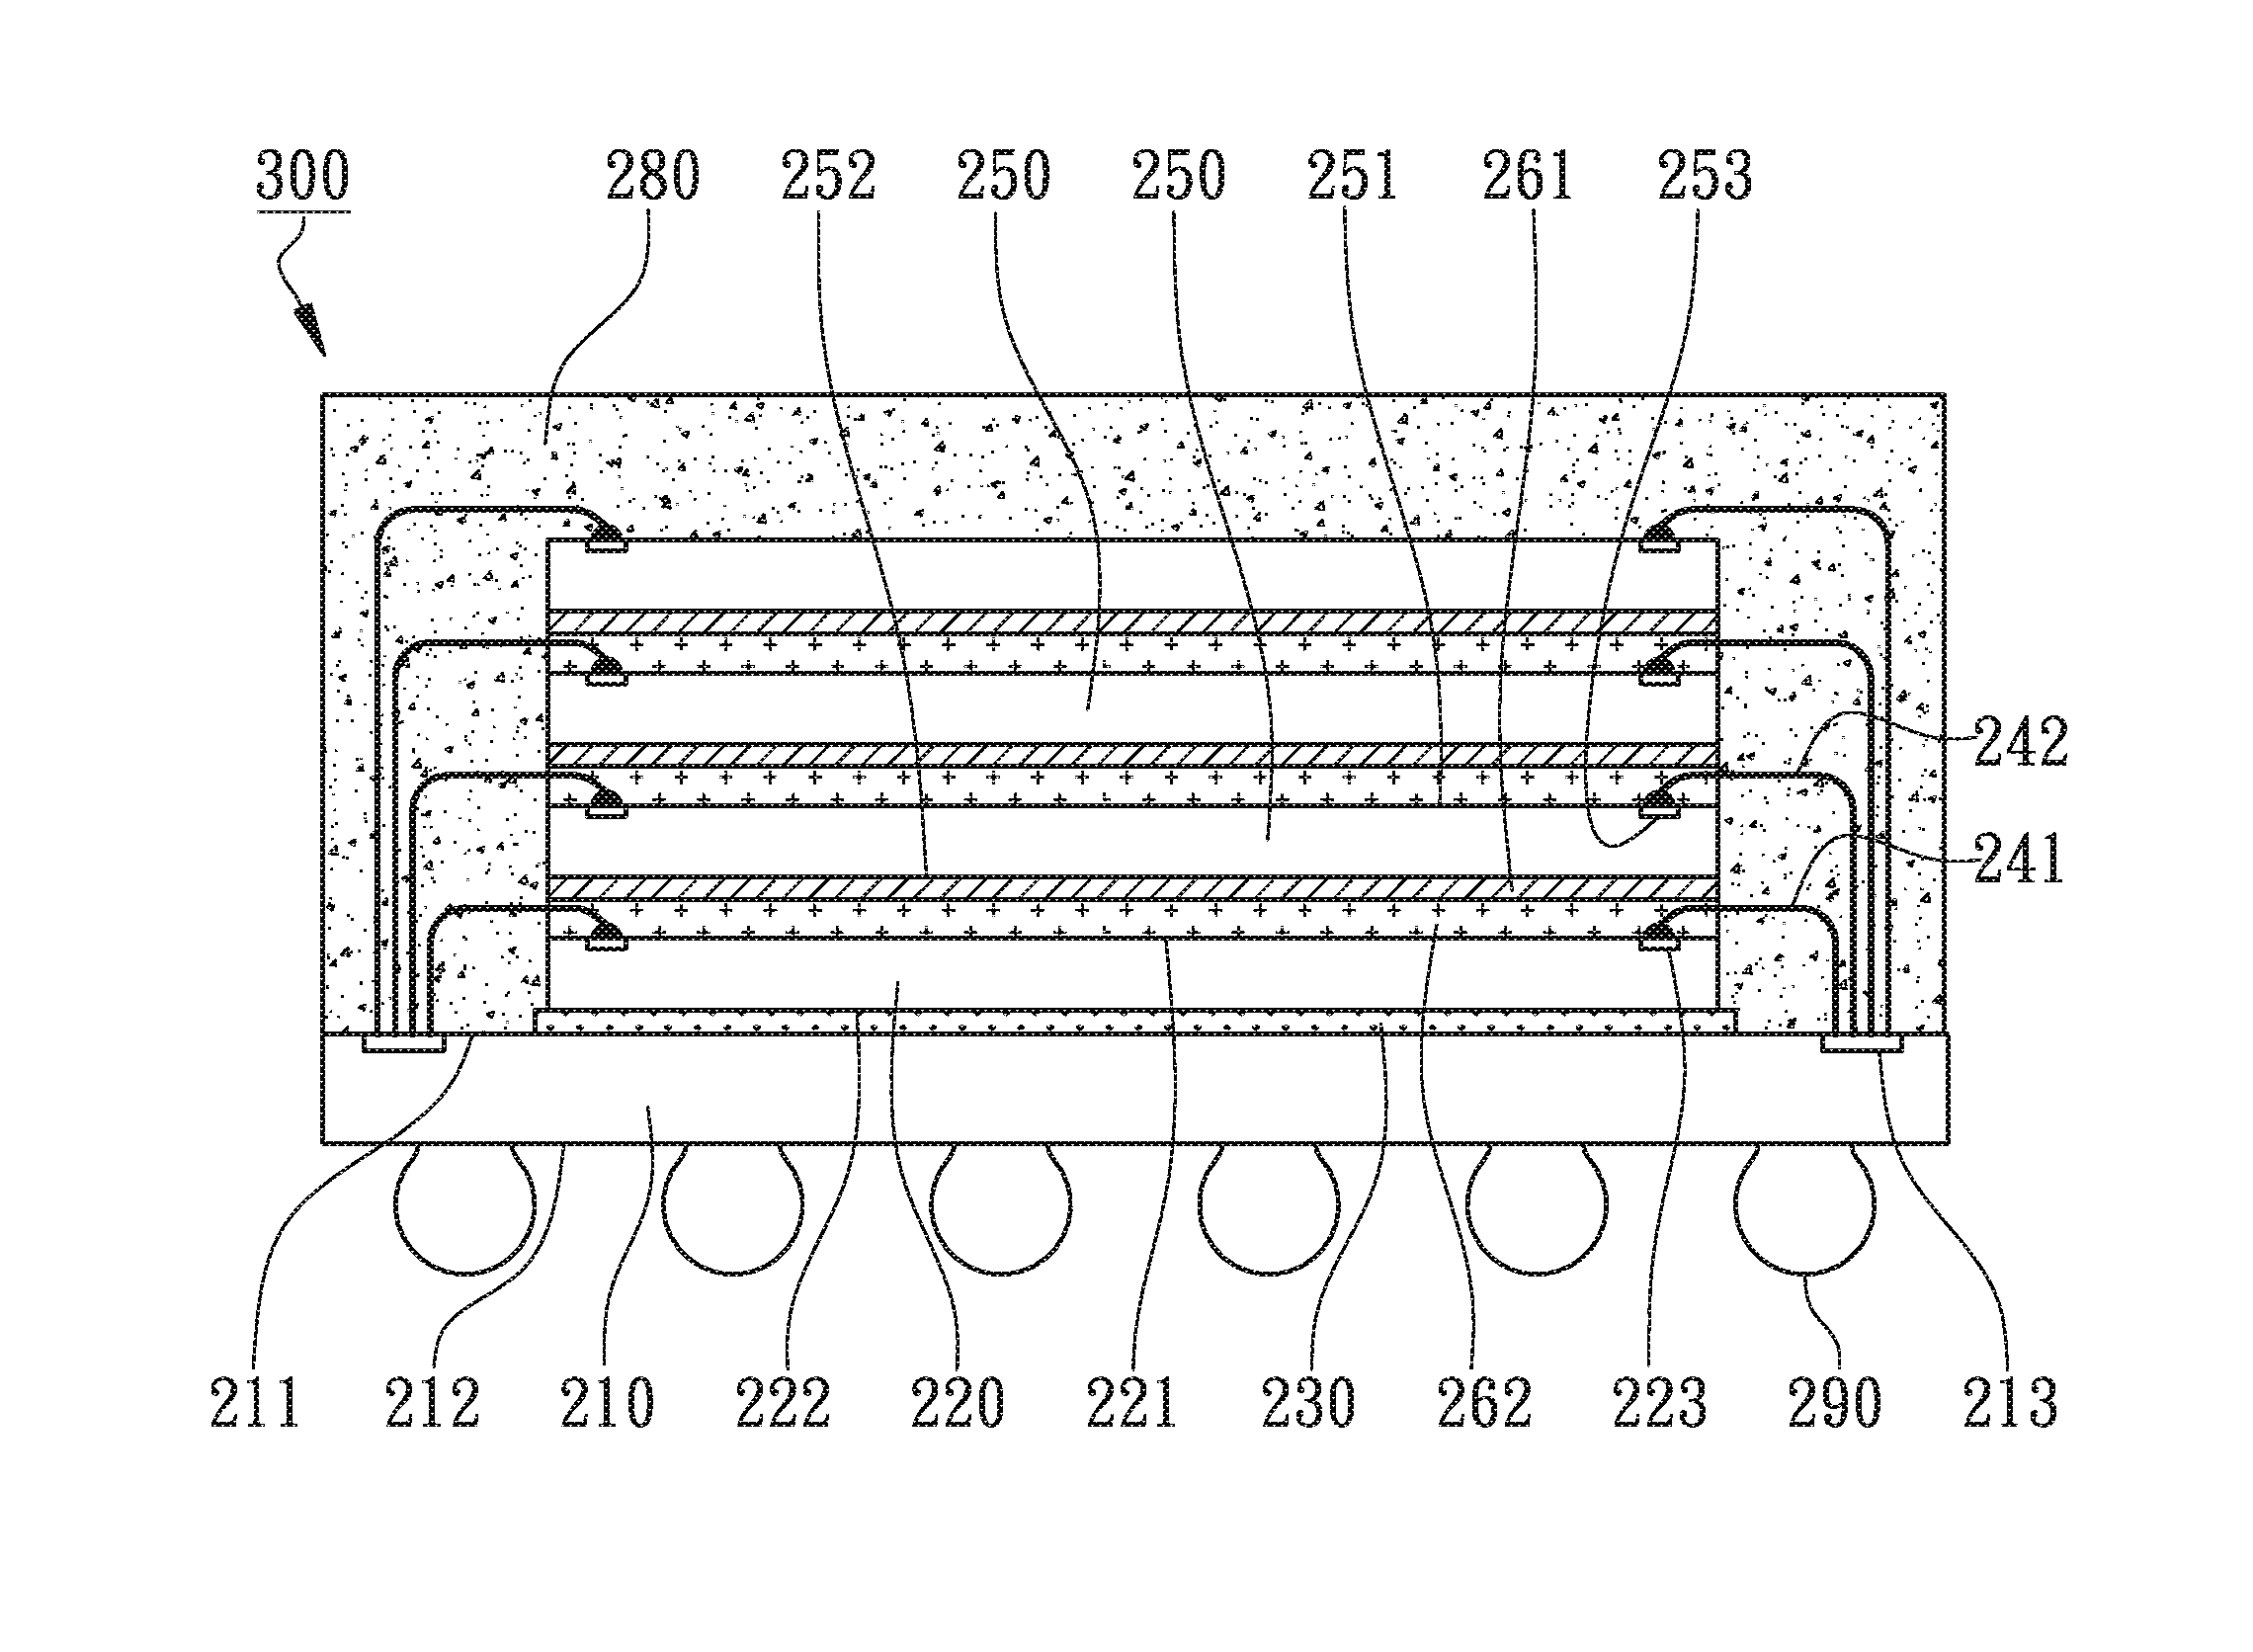 Multi-chip stacking method to reduce voids between stacked chips